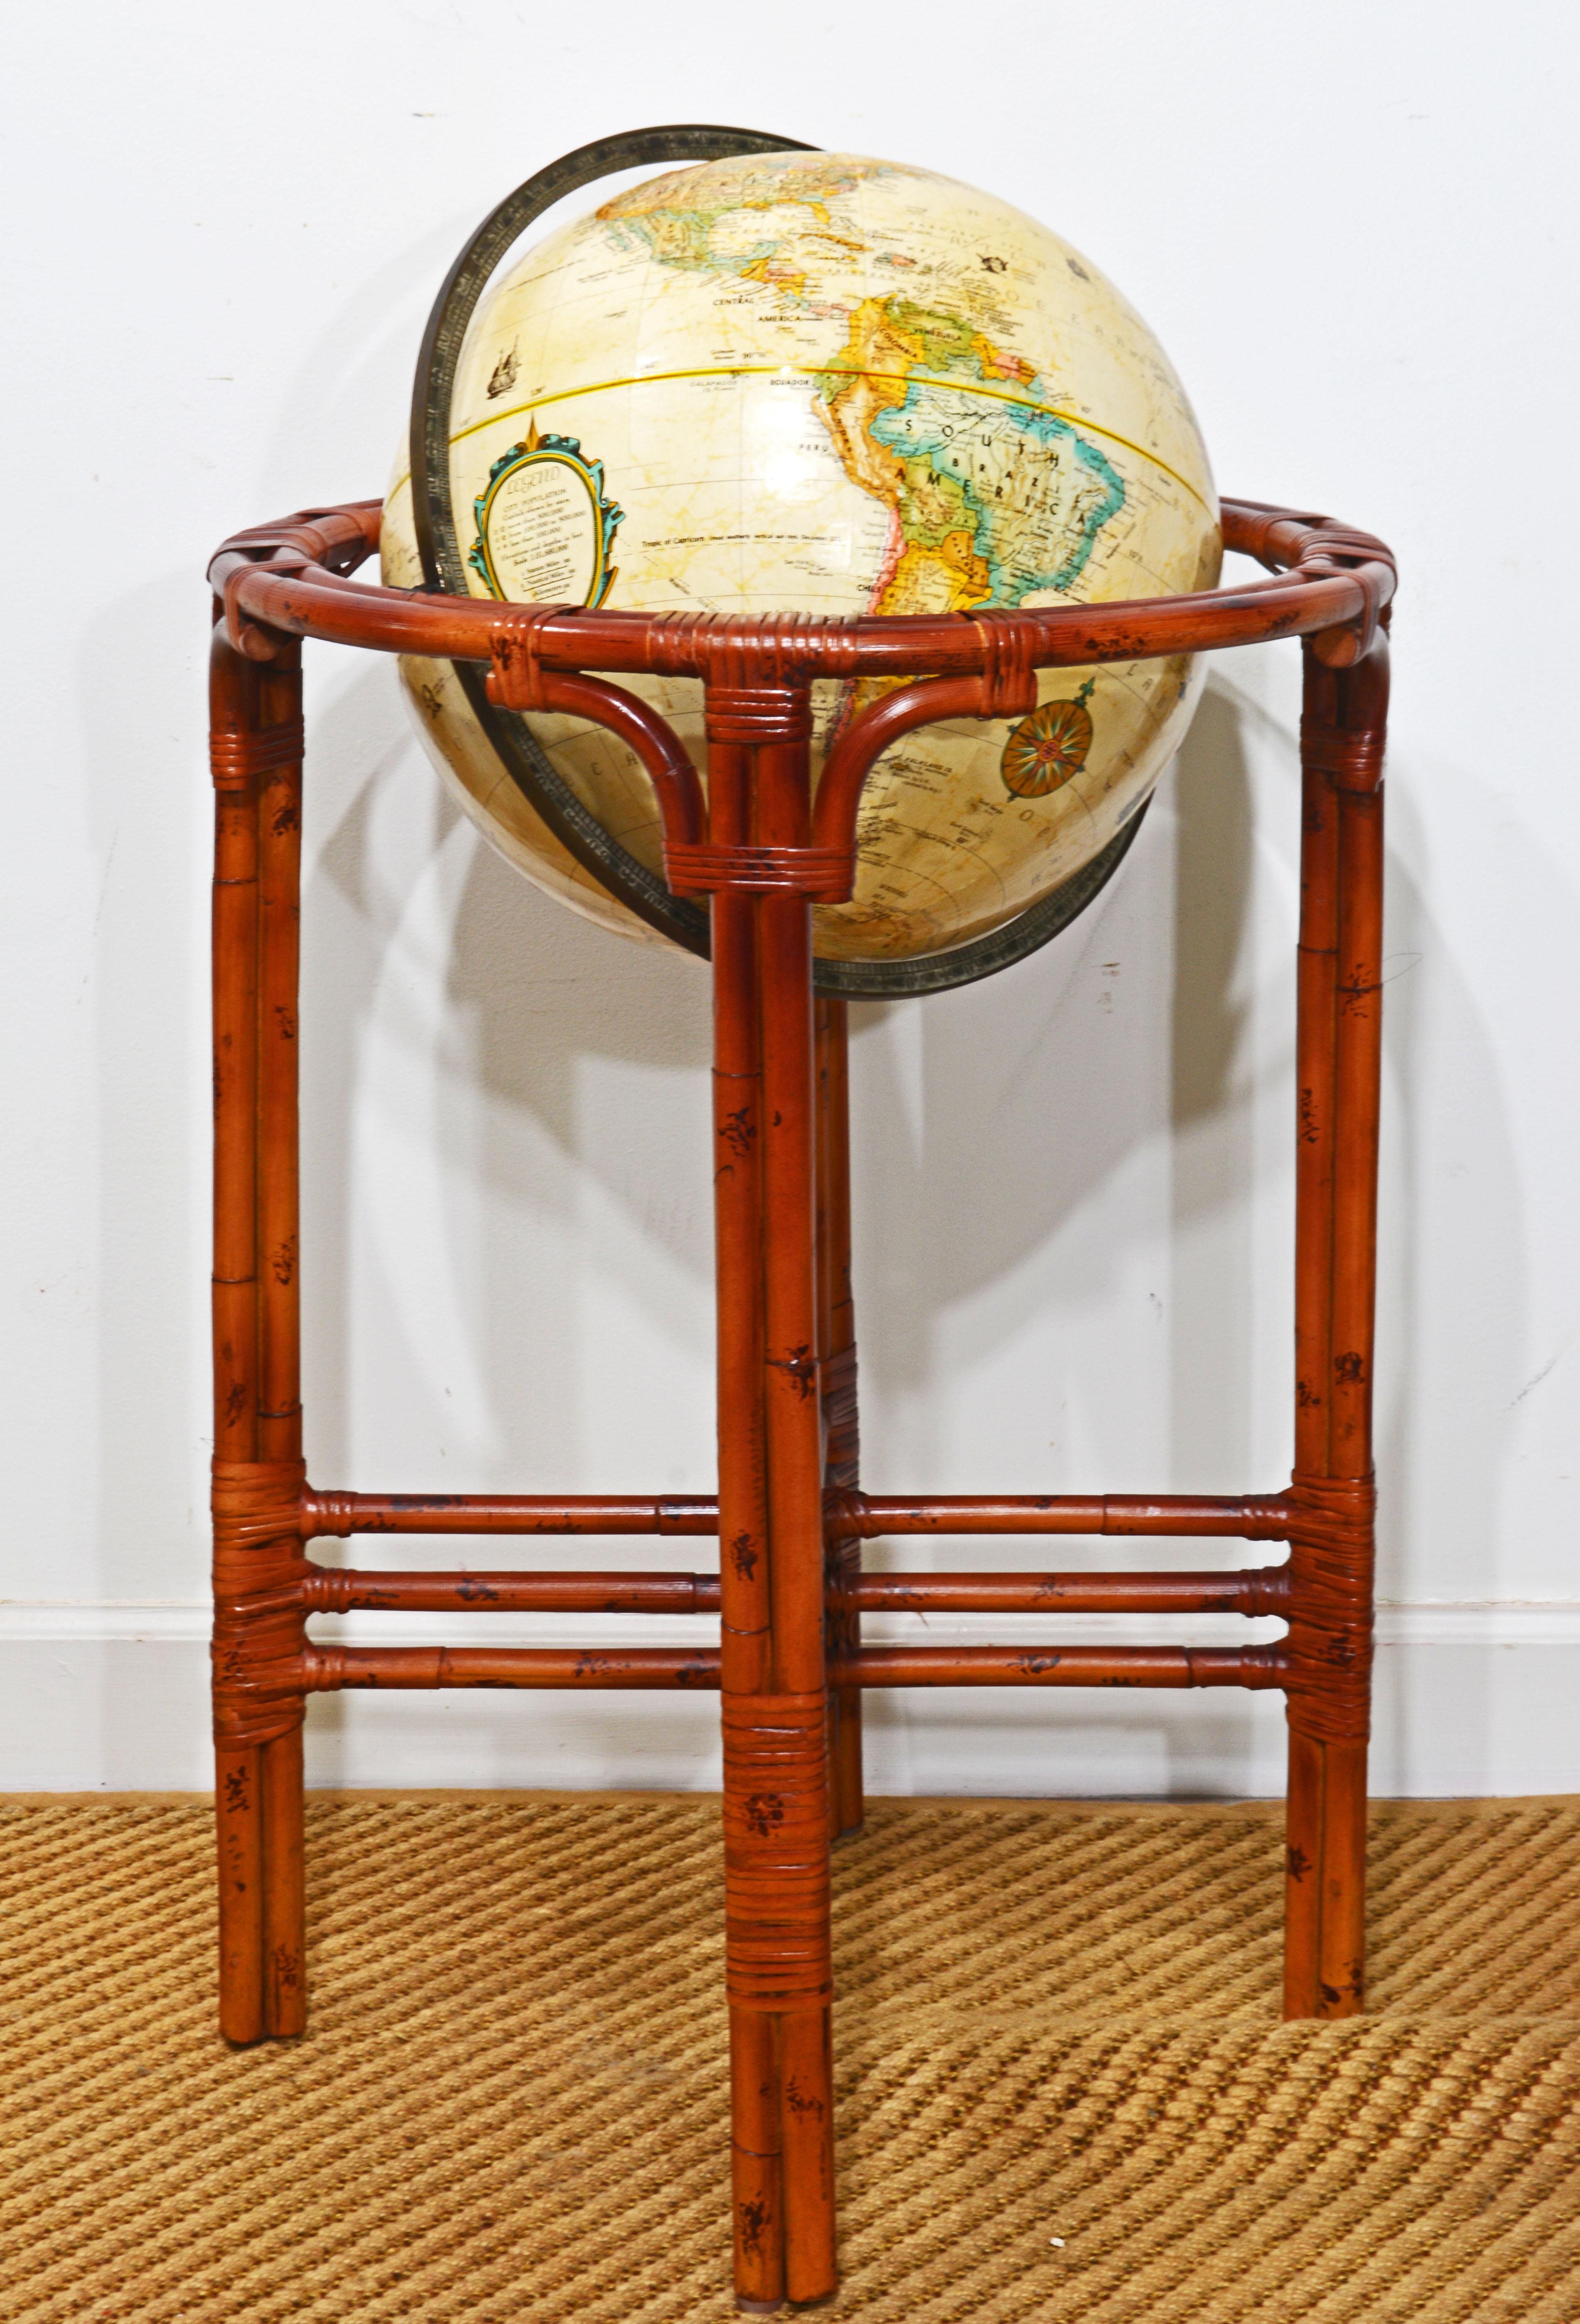 This vintage terrestrial Replogle World Classic 16 in. relief globe is mounted in a lacquered Rattan Bamboo stand with four legs, each made of three stems and joined by decorative triple cross stretchers. It is of quite unique tropical colonial